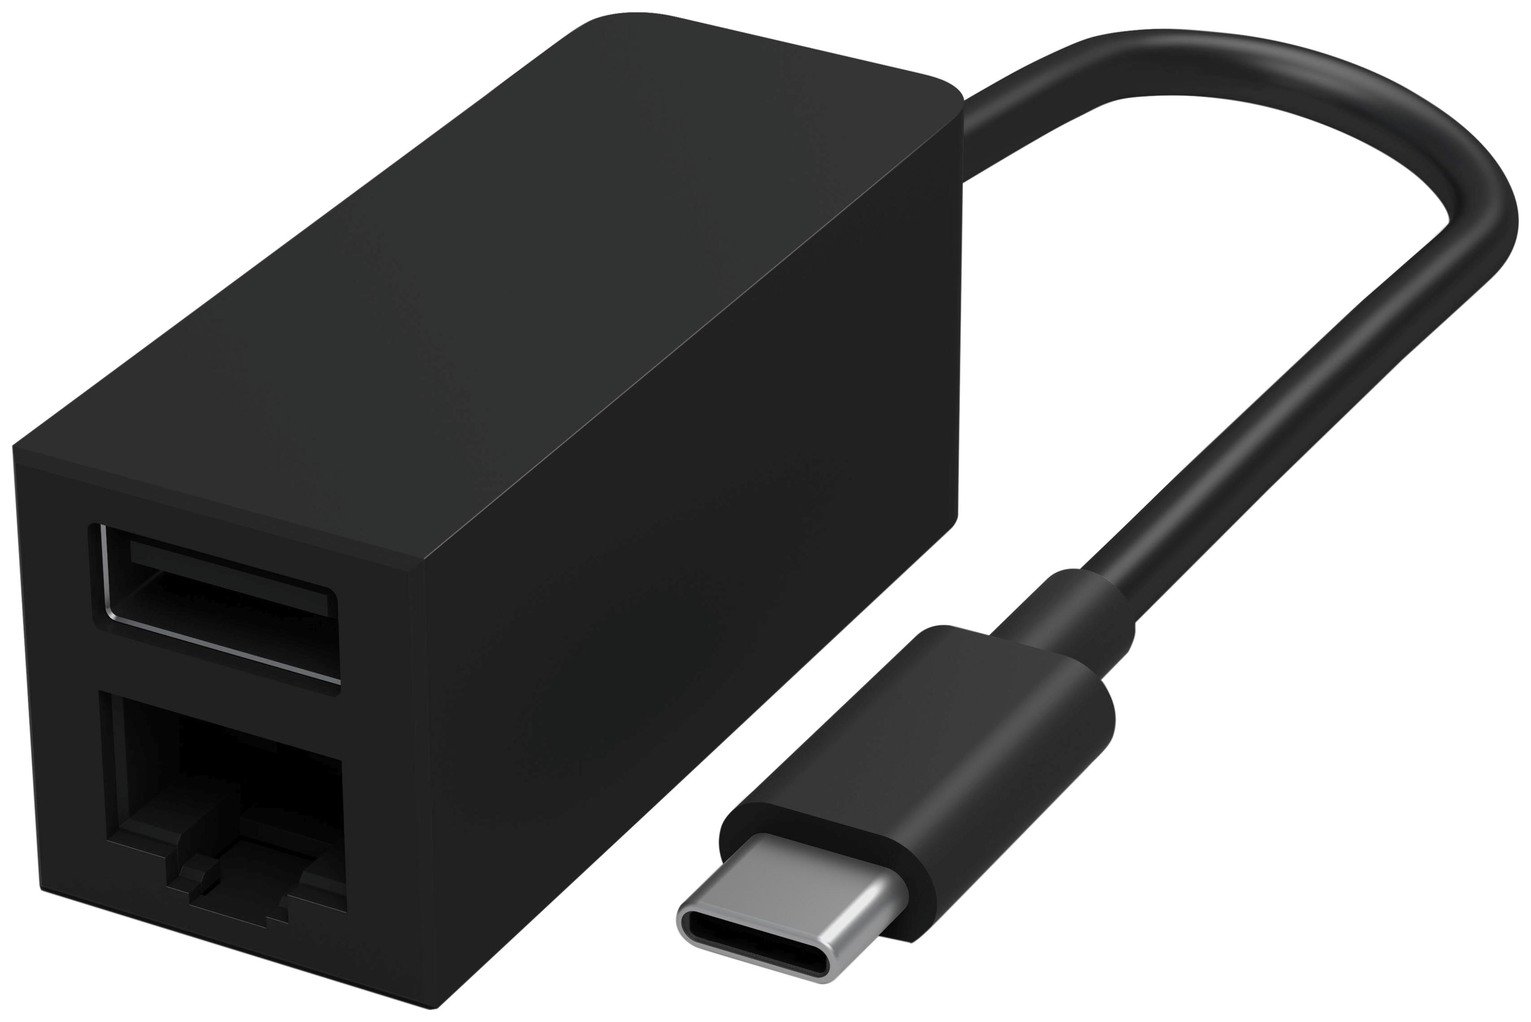 Microsoft Surface USB-C to Ethernet Adaptor Review